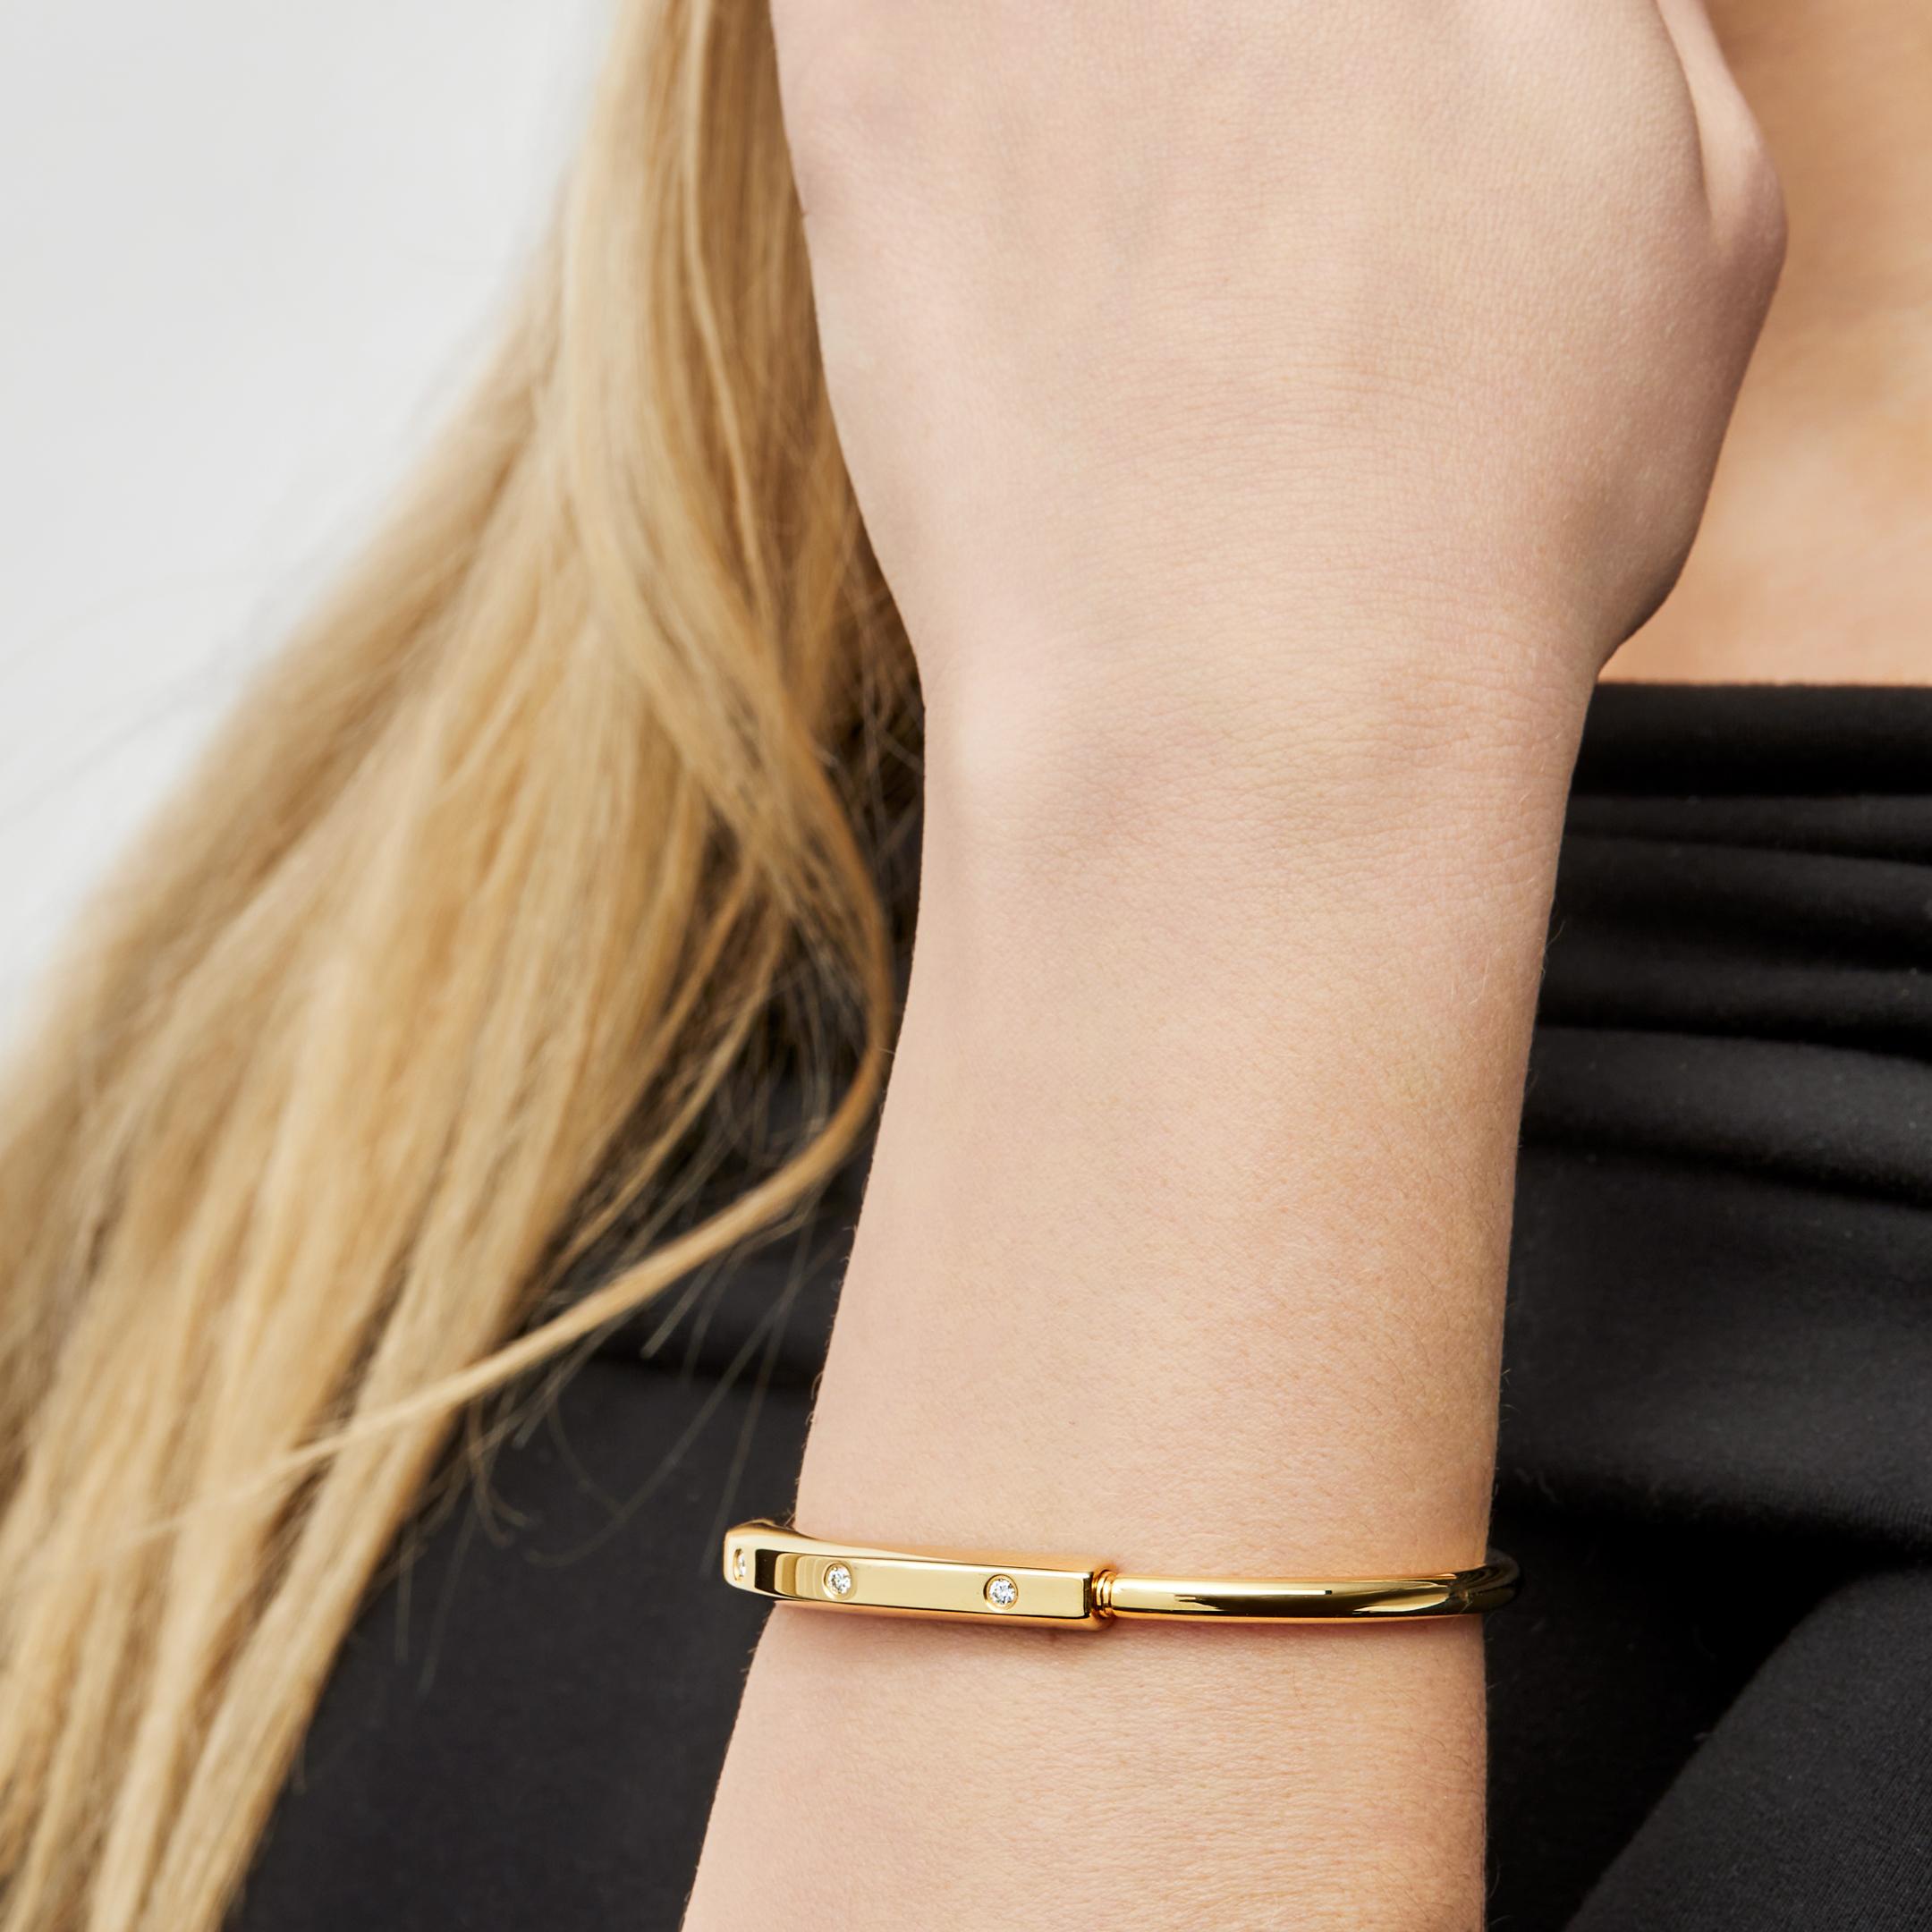 Designed to be worn by all genders, The Tiffany & Co Lock Bangle is a bold visual statement about the personal bonds. 

Crafted in 18-karat yellow gold, the Tiffany Lock bangle features an innovative clasp a nod to Tiffany's history. Carefully